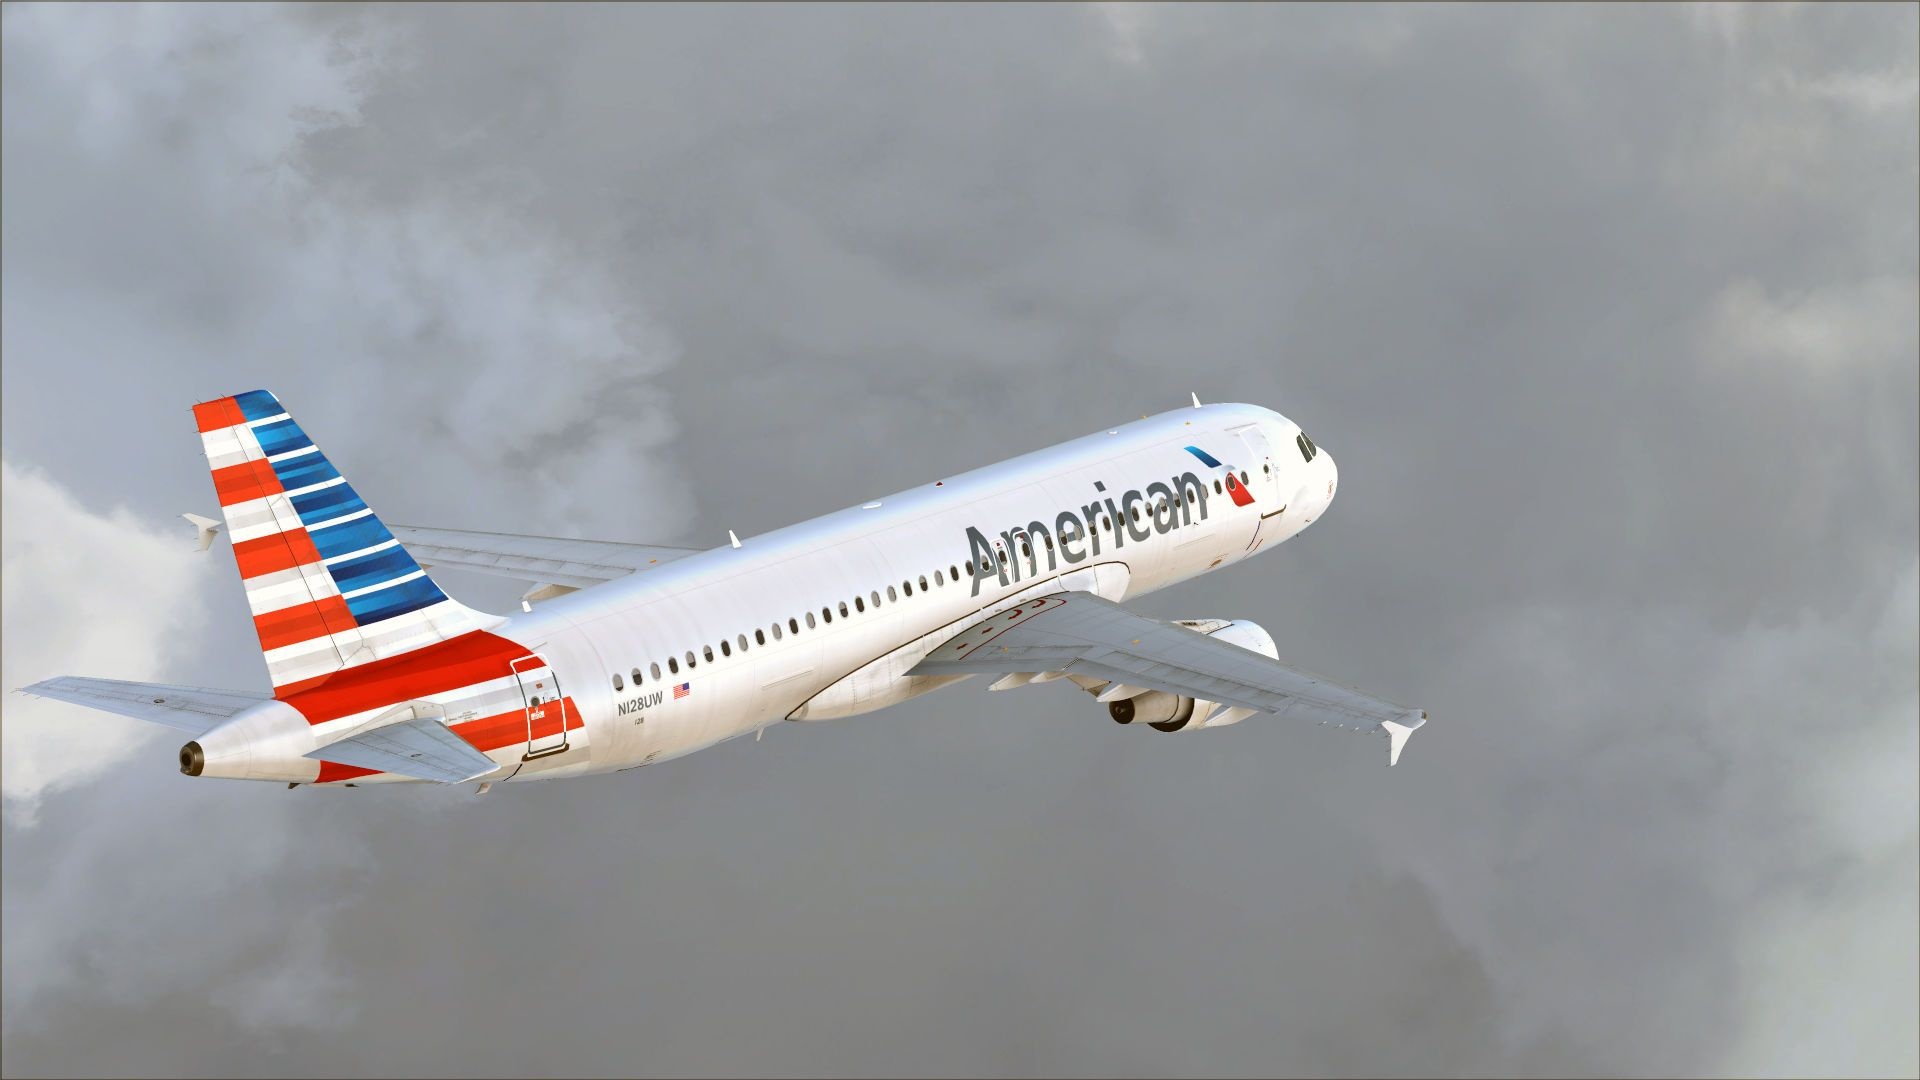 American Airlines, Top free backgrounds, Airline wallpapers, Travel theme, 1920x1080 Full HD Desktop